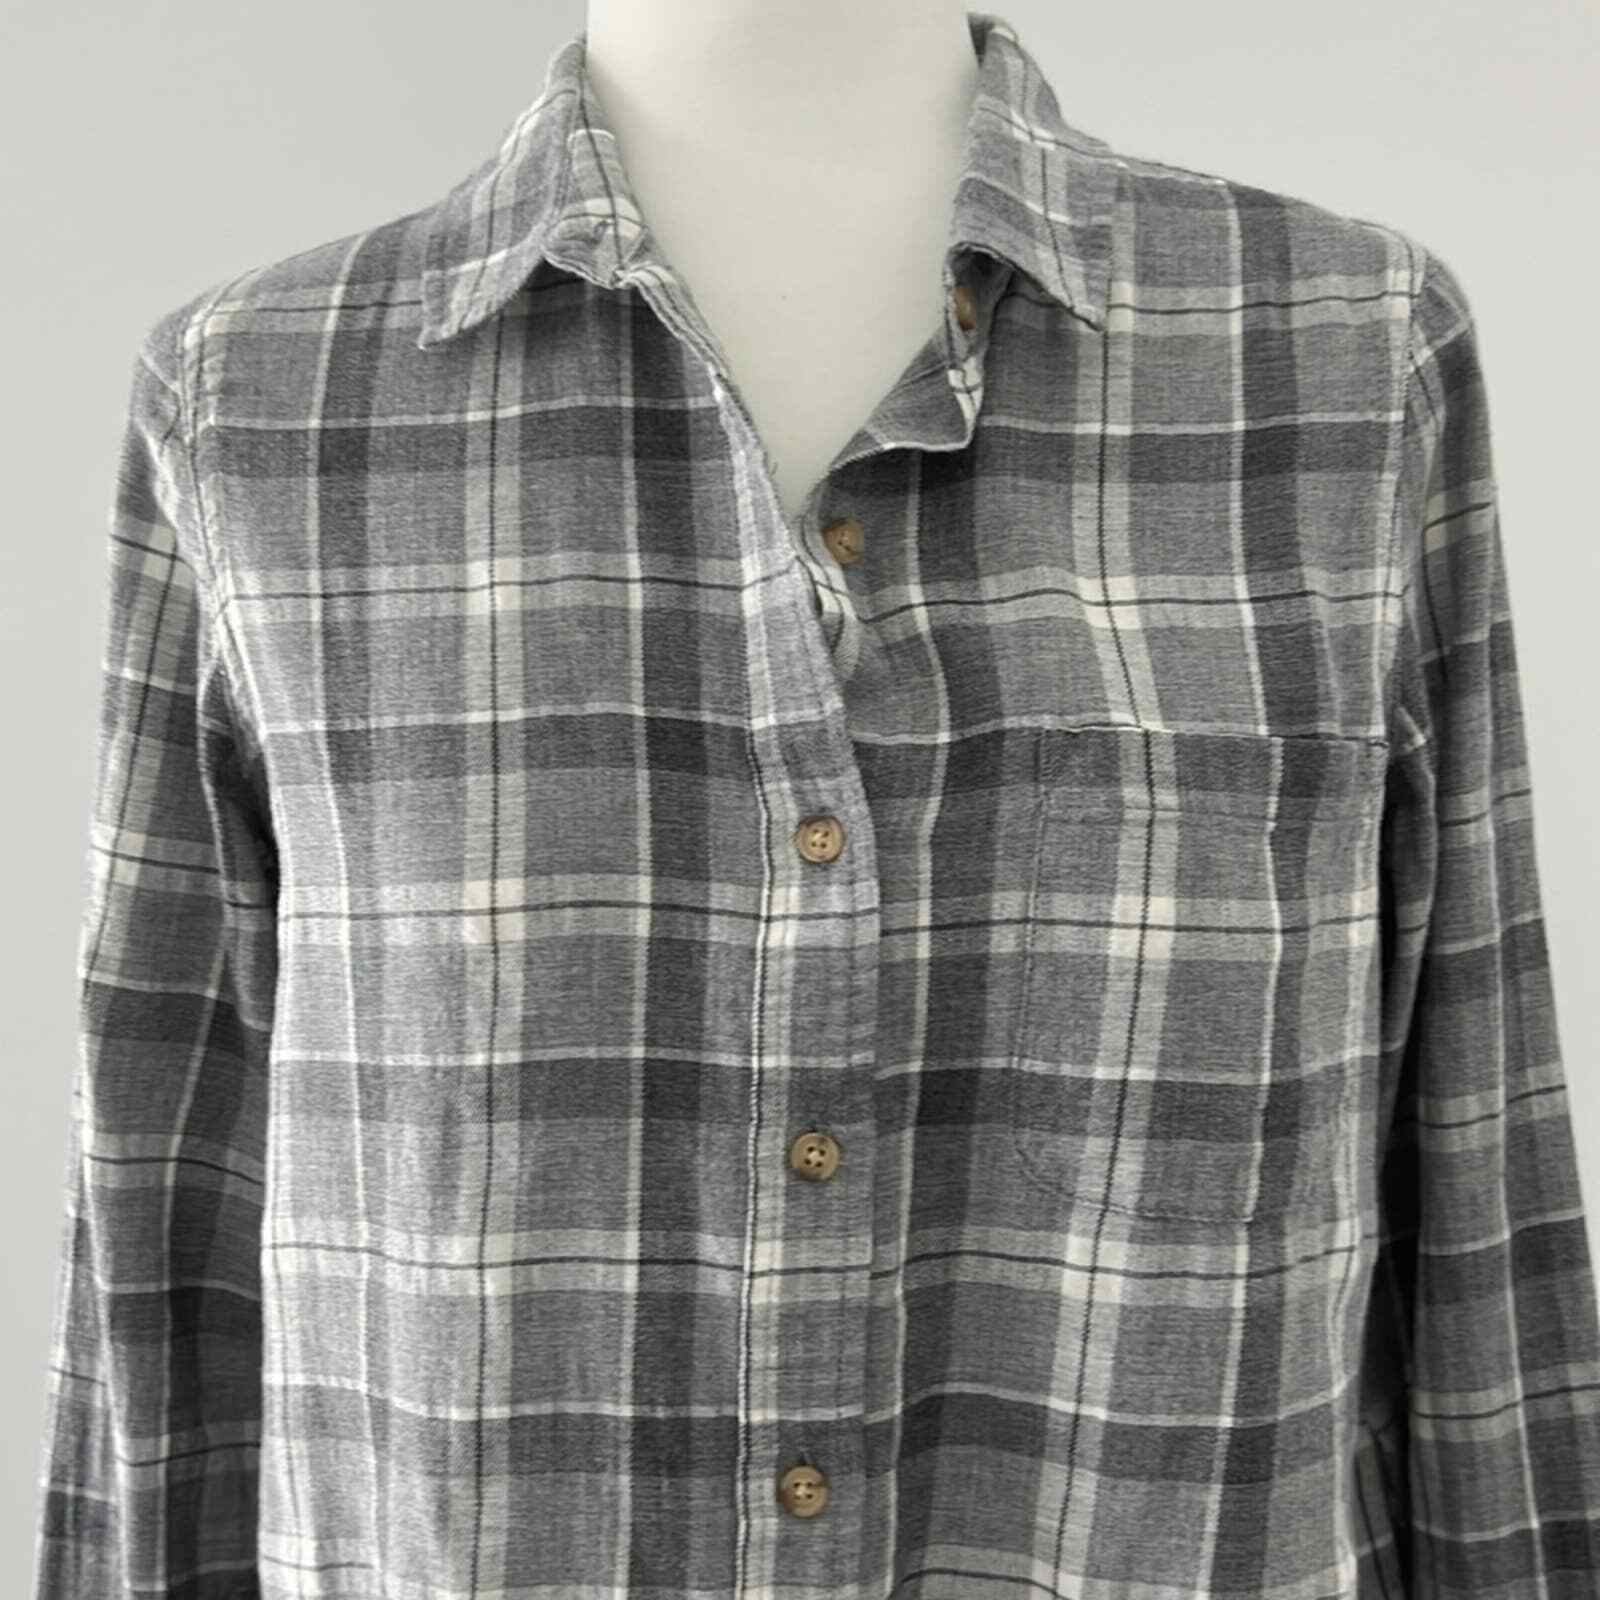 MARINE LAYER gray plaid meadow button down flanne… - image 3